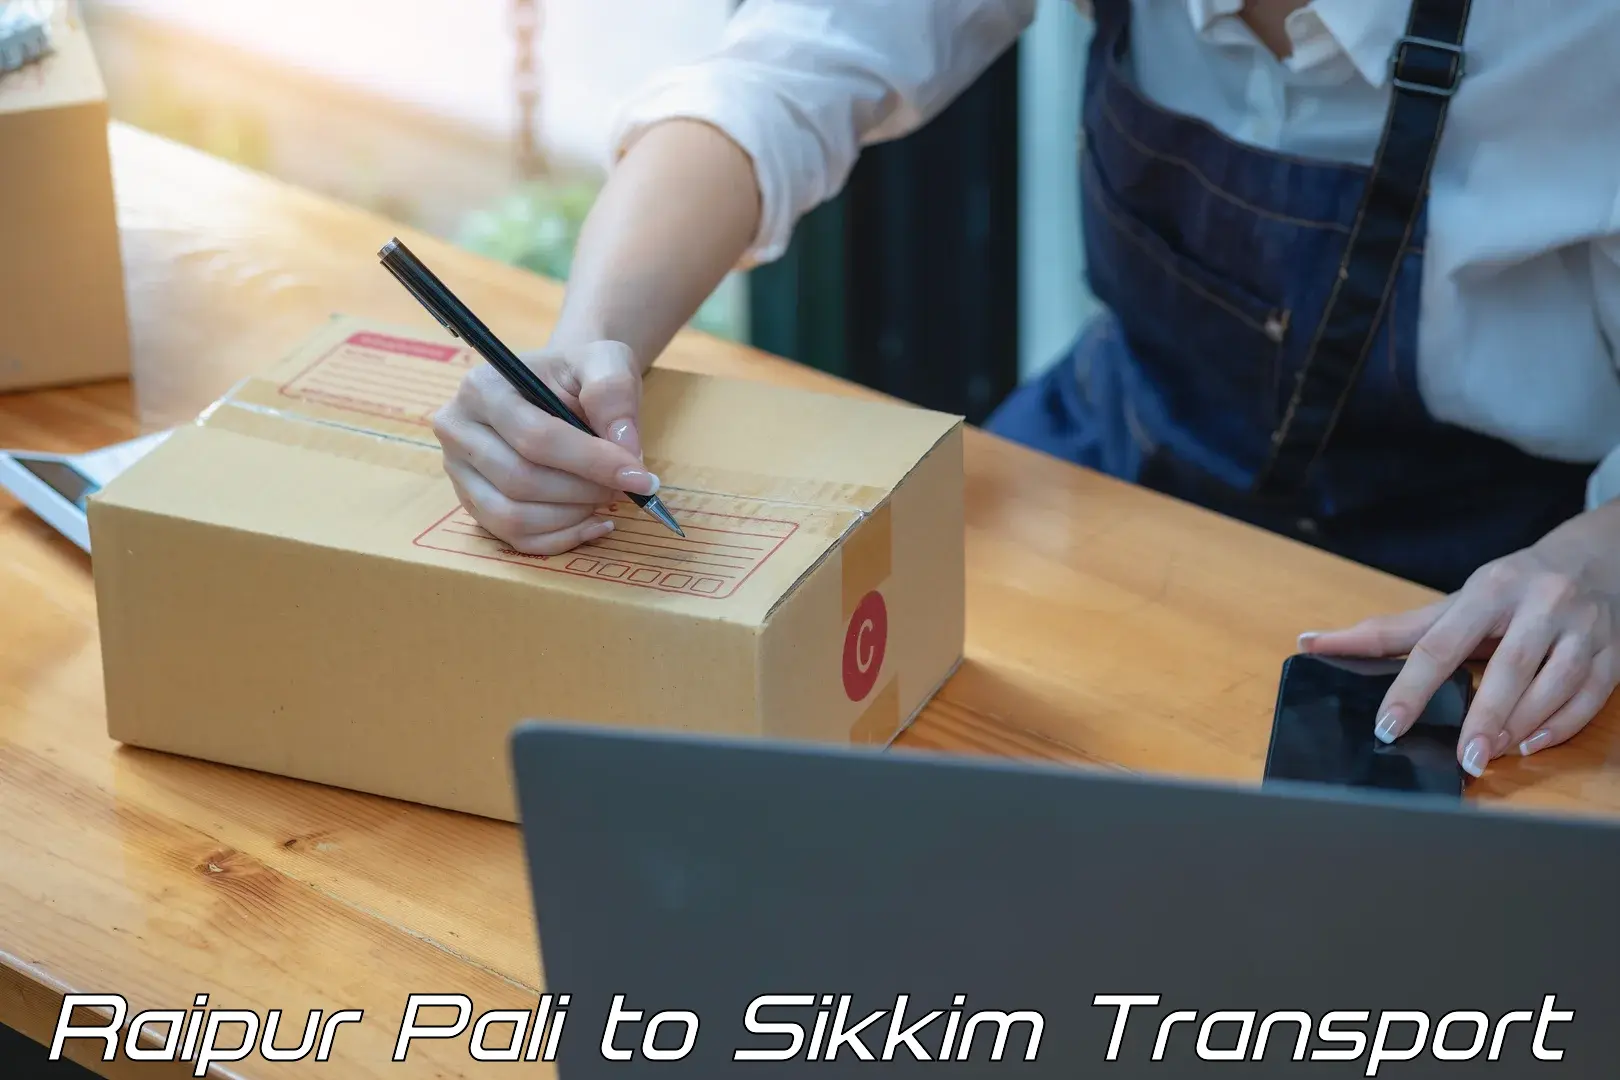 Air freight transport services Raipur Pali to Sikkim